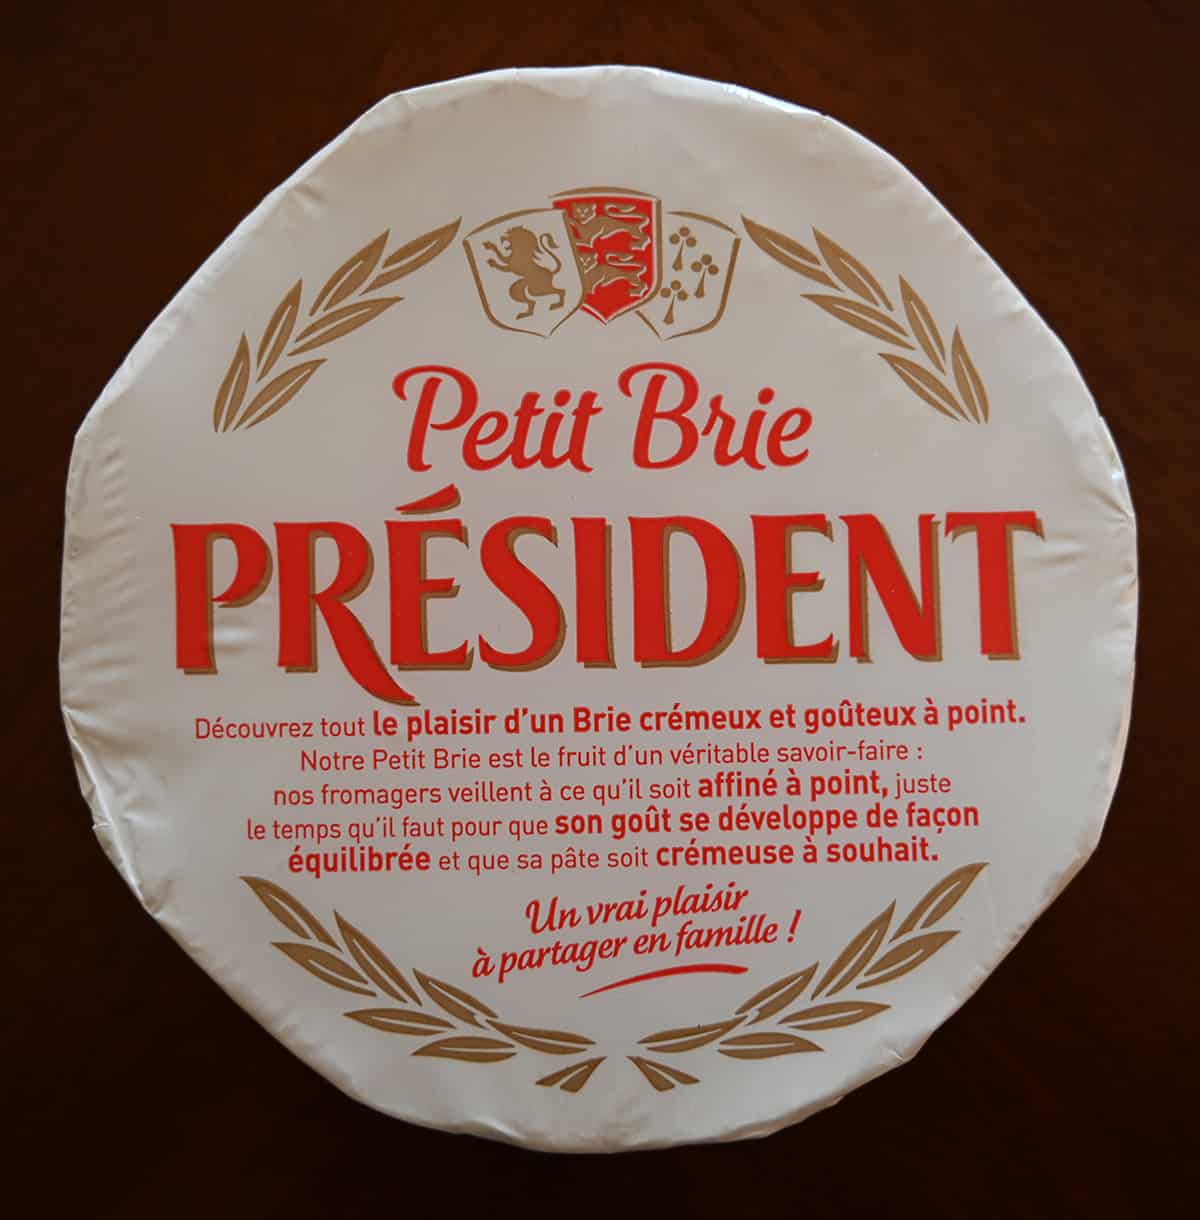 Top down image of the Brie wheel in its individual packaging.